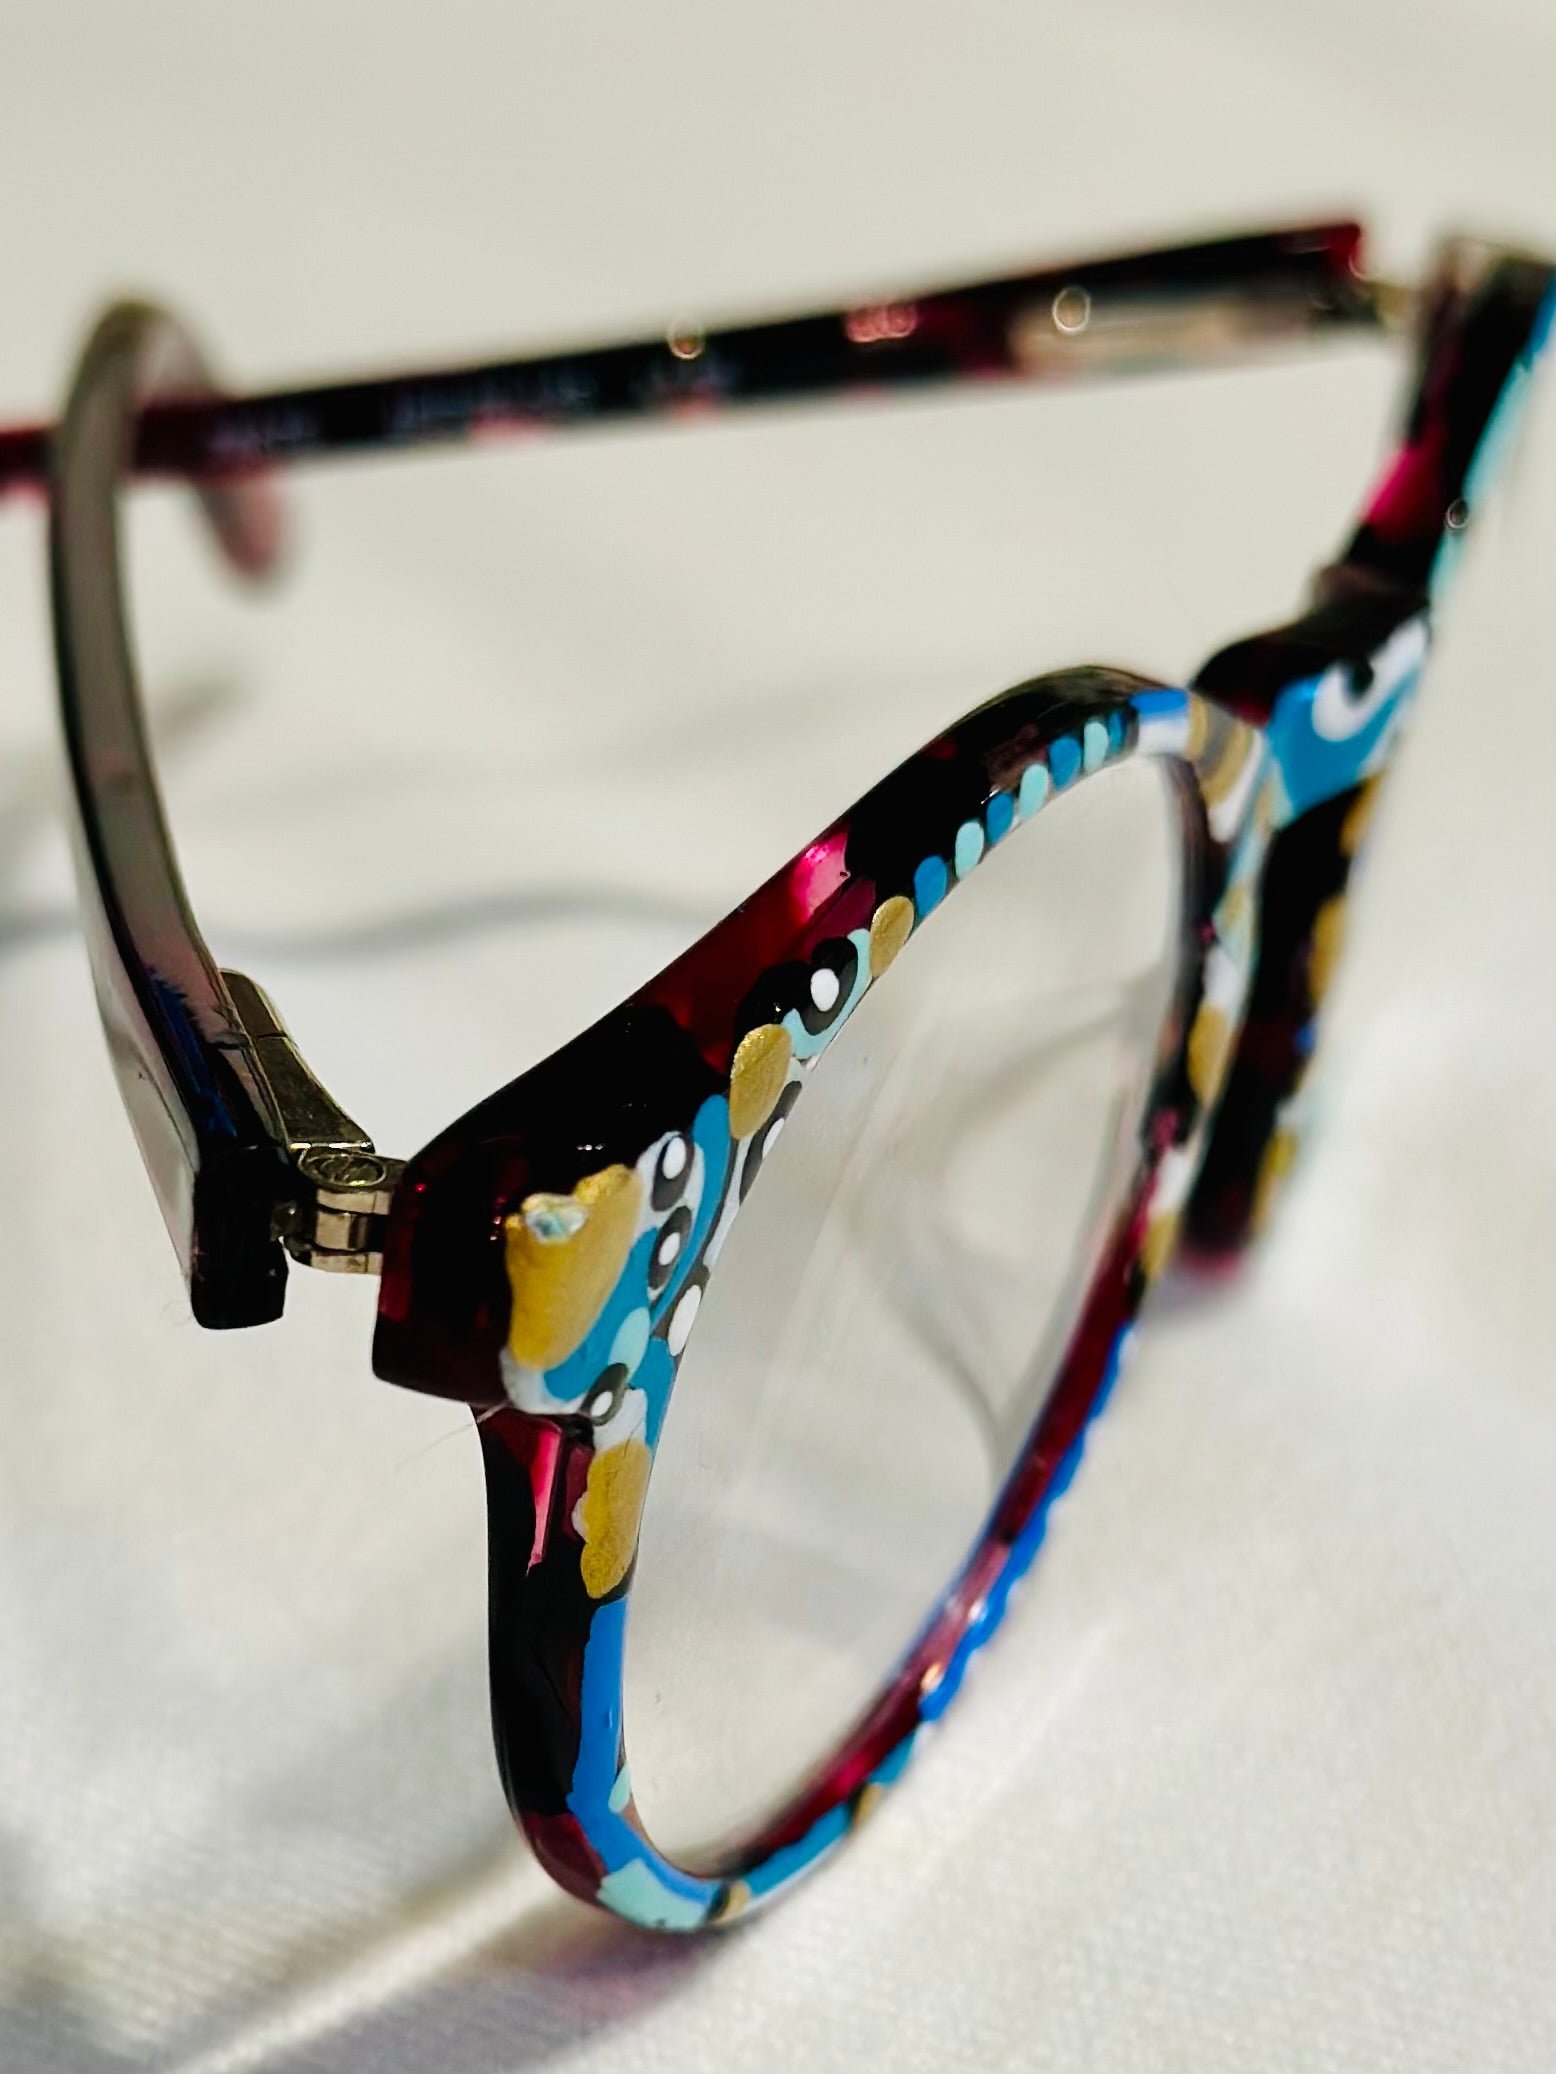 Hand Painted Reading Glasses 1.50 magnification